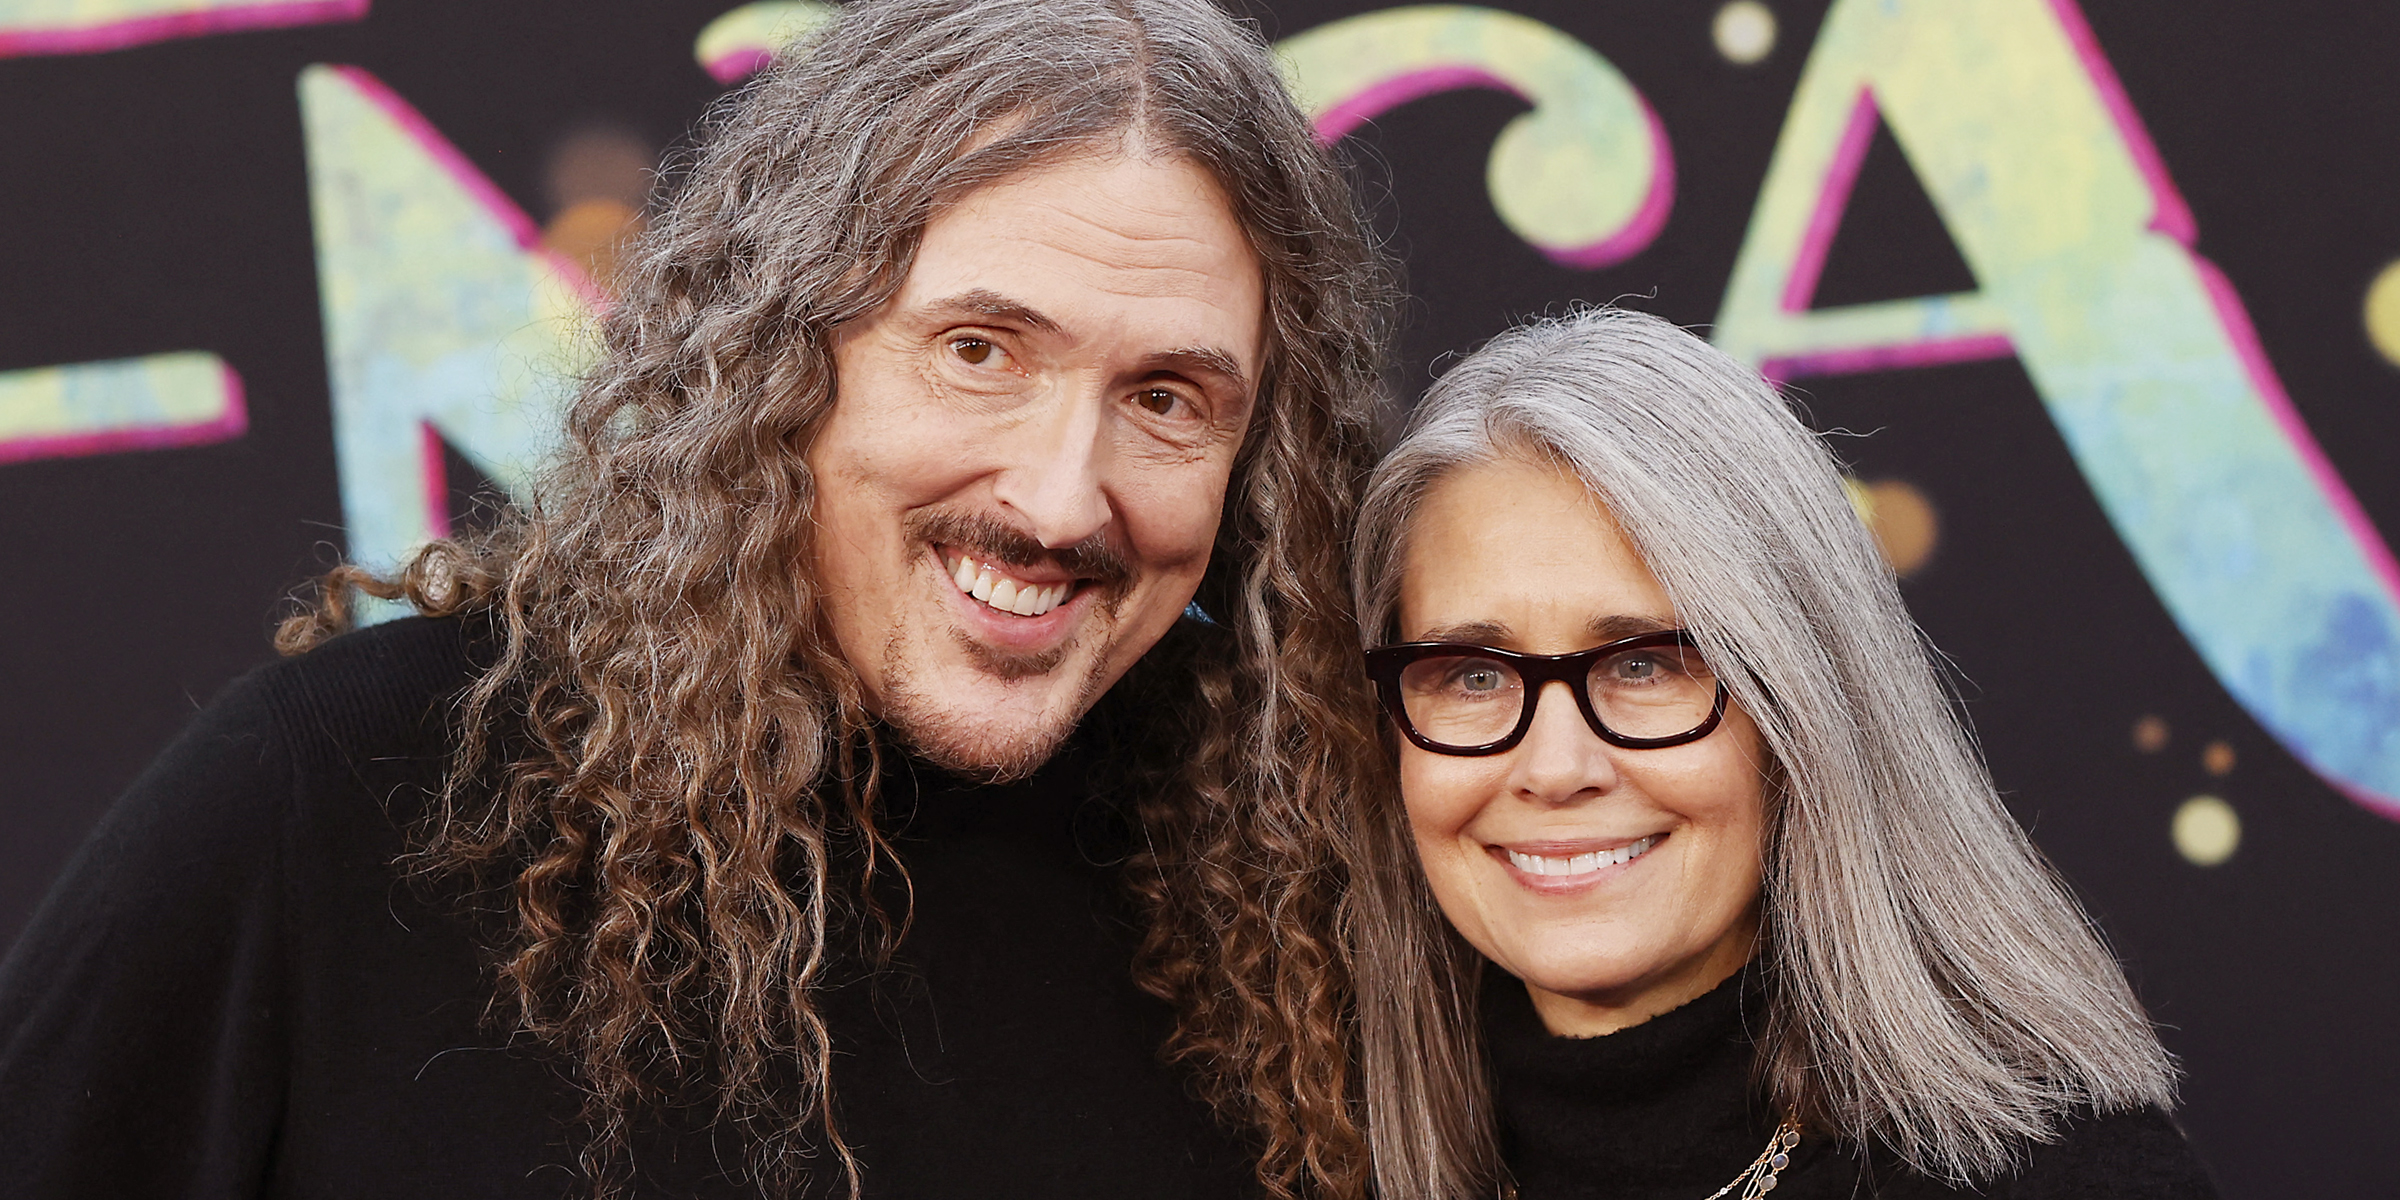 Weird AI and His Wife Suzanne Yankovic | Source: Getty Images